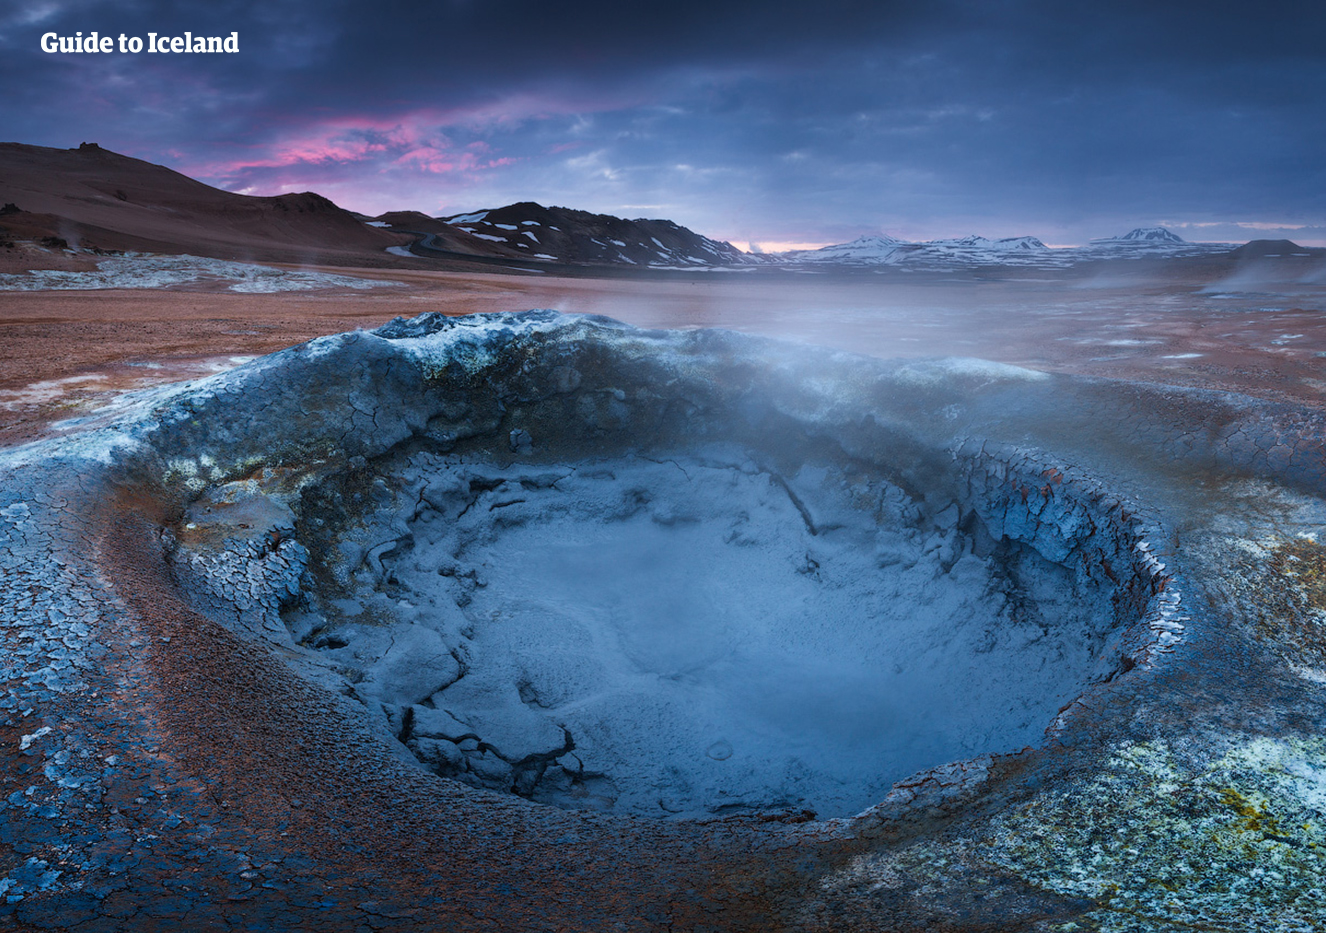 Much of the area surrounding Lake Mývatn is geothermal.